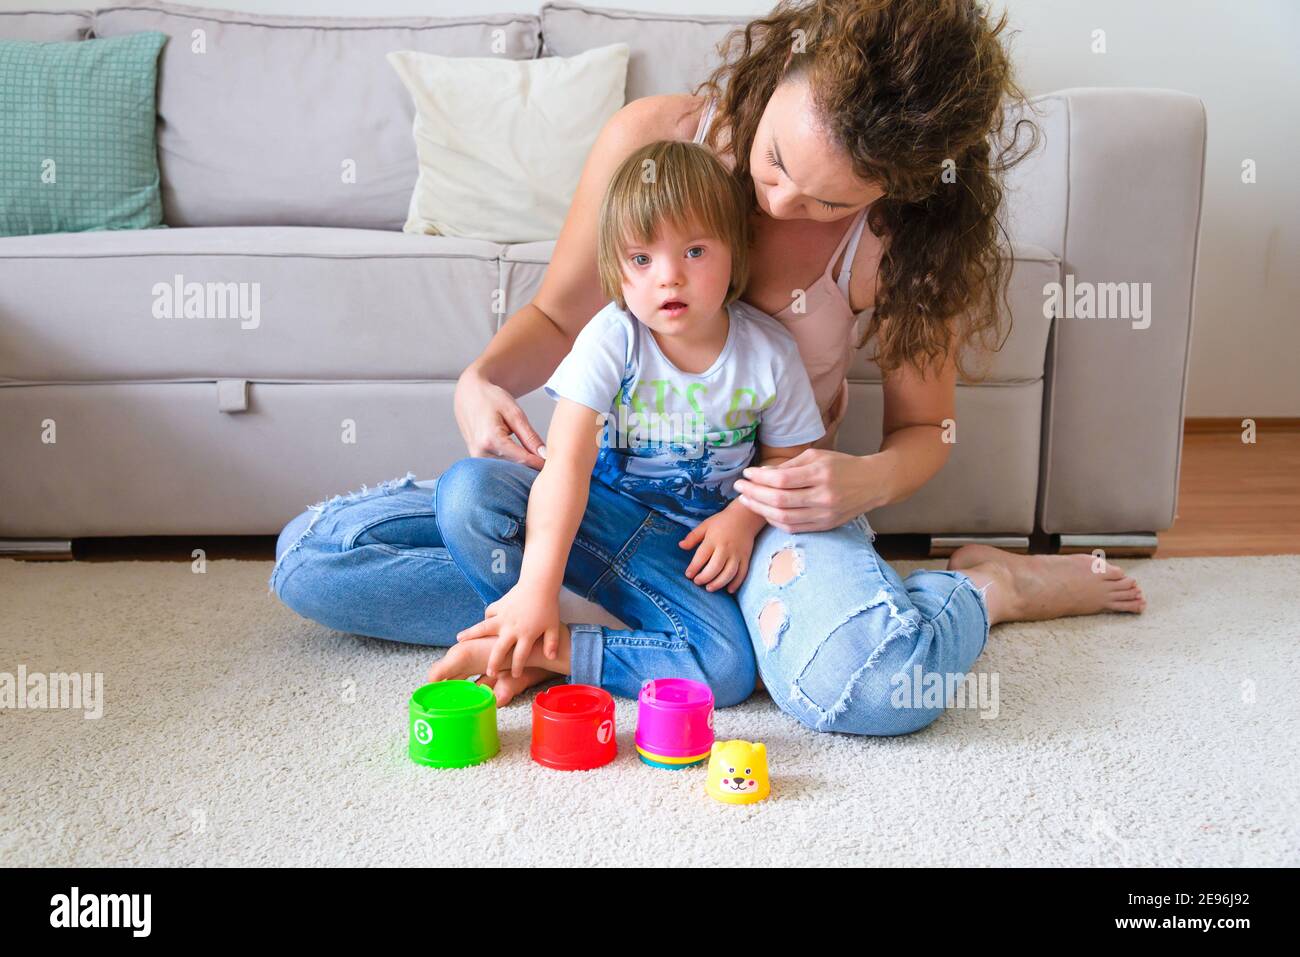 Single young mother and her disabled authentic child, playing in their living room Stock Photo